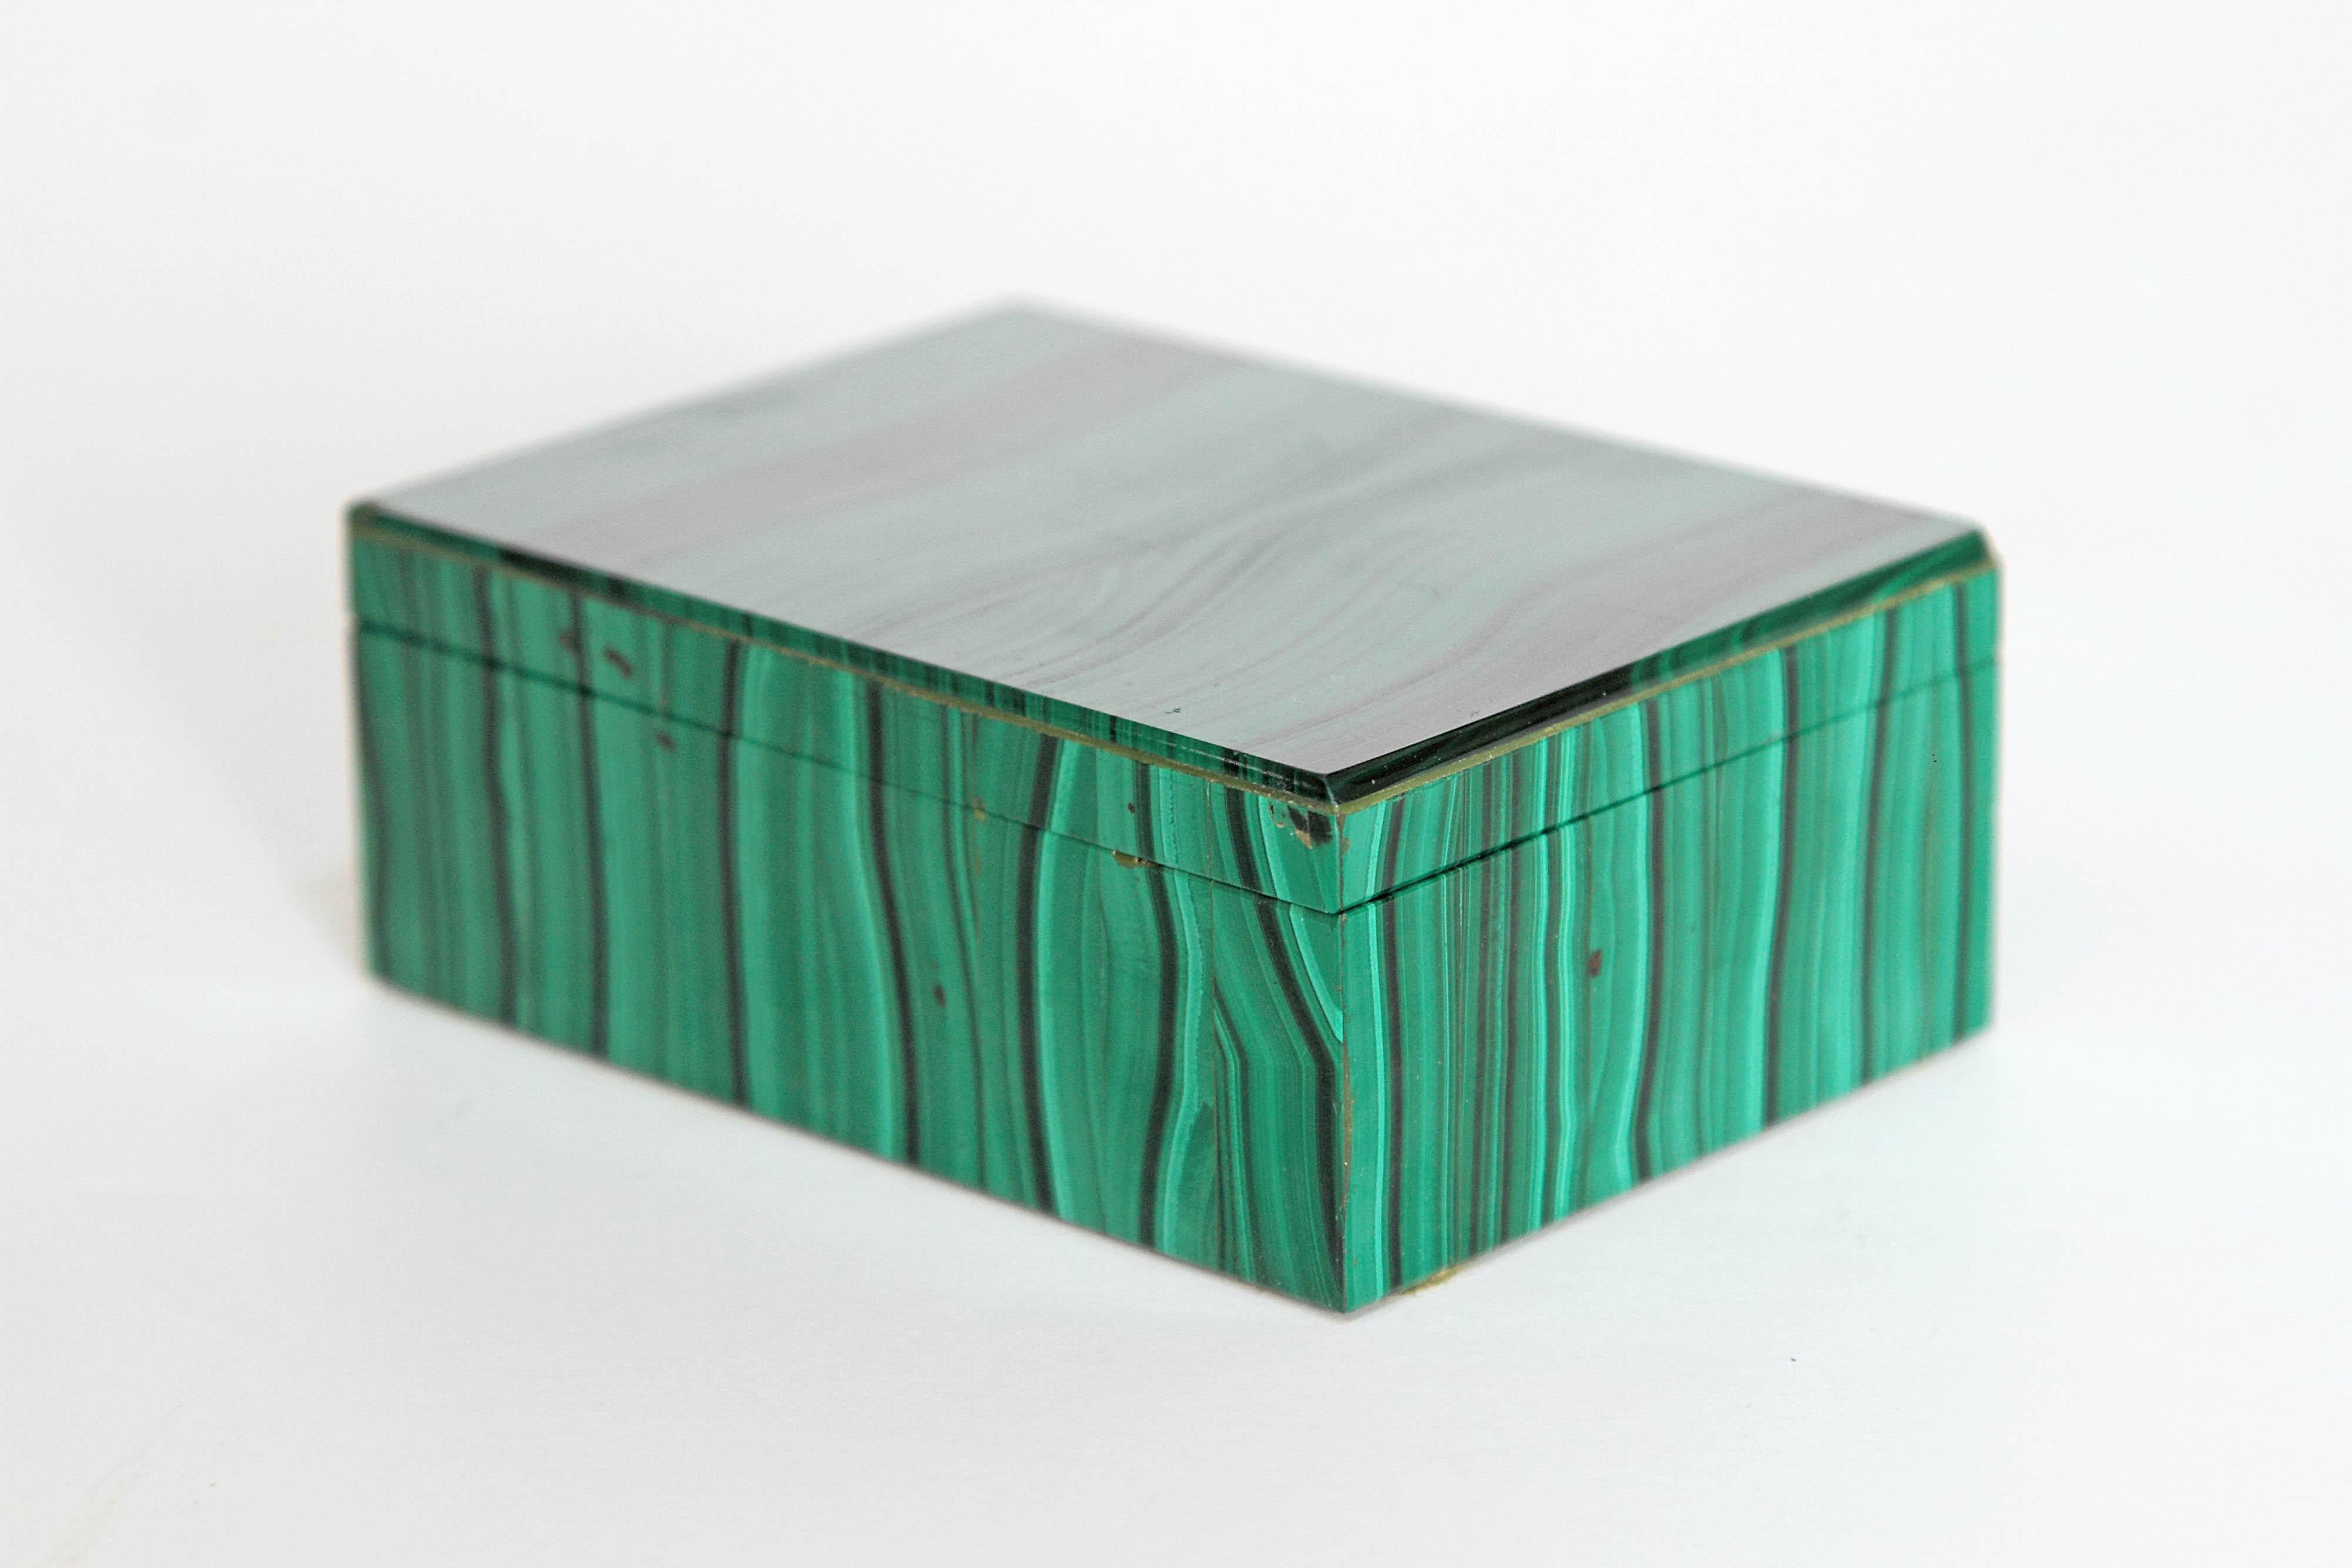 A vintage or midcentury malachite box, small, with very nicely matched pattern and a vibrant green color, white stone interior.